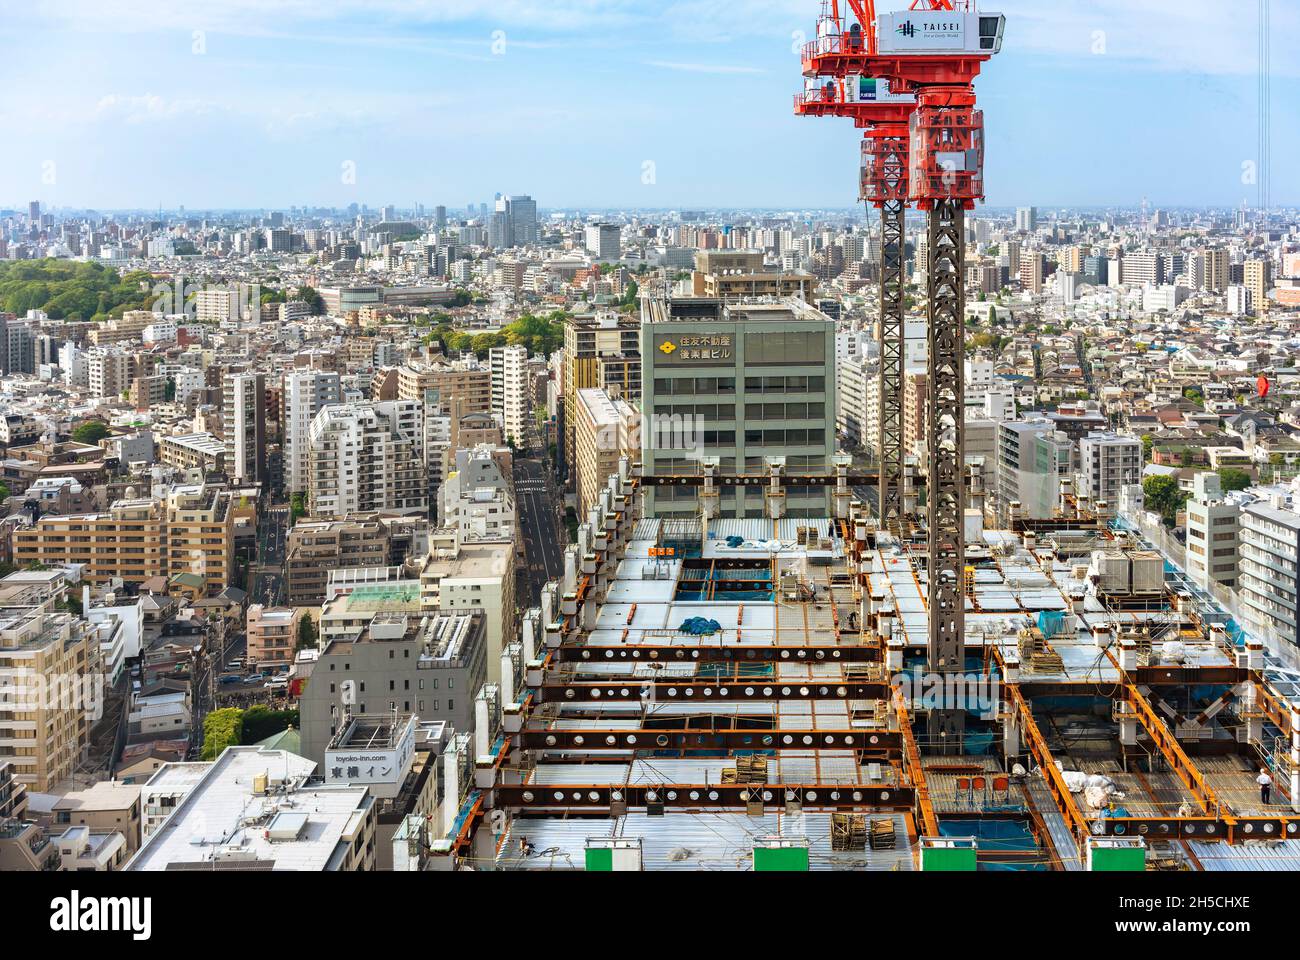 tokyo, japan - may 03 2019: Bunkyo Garden Gate Tower under construction with elevated cranes on top of the skyscraper and workers walking on the load- Stock Photo